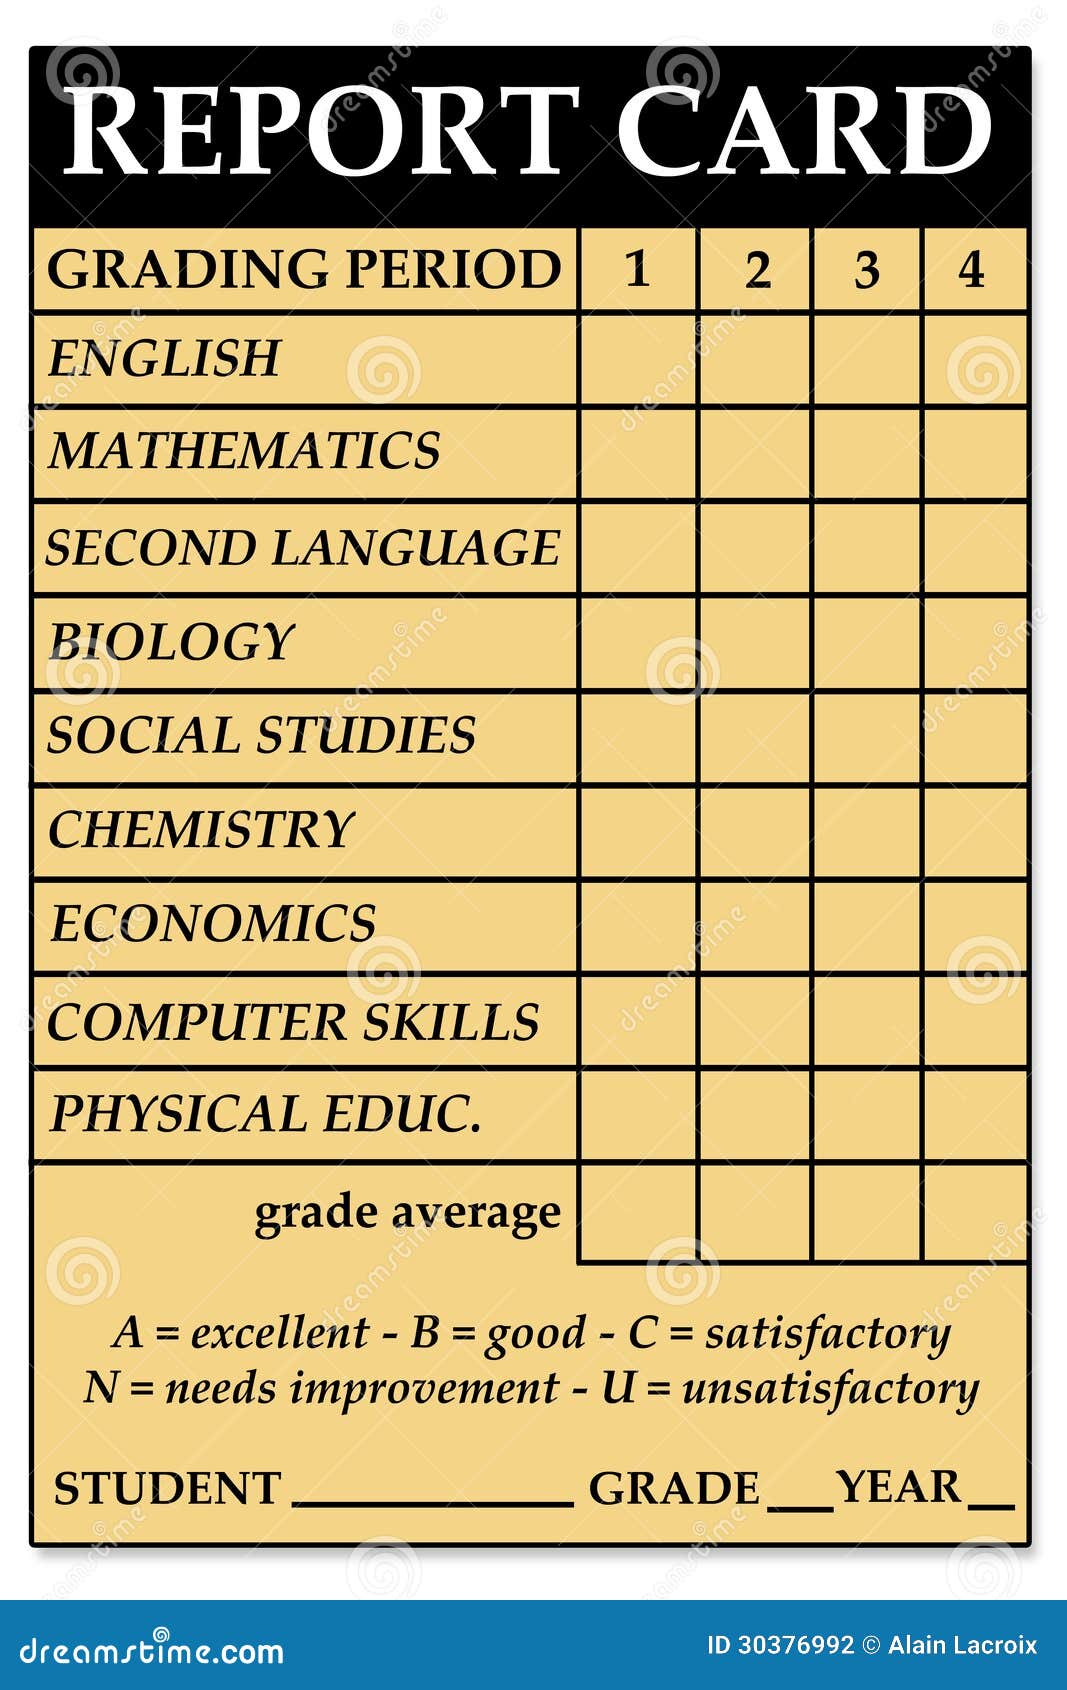 free clipart school report card - photo #42